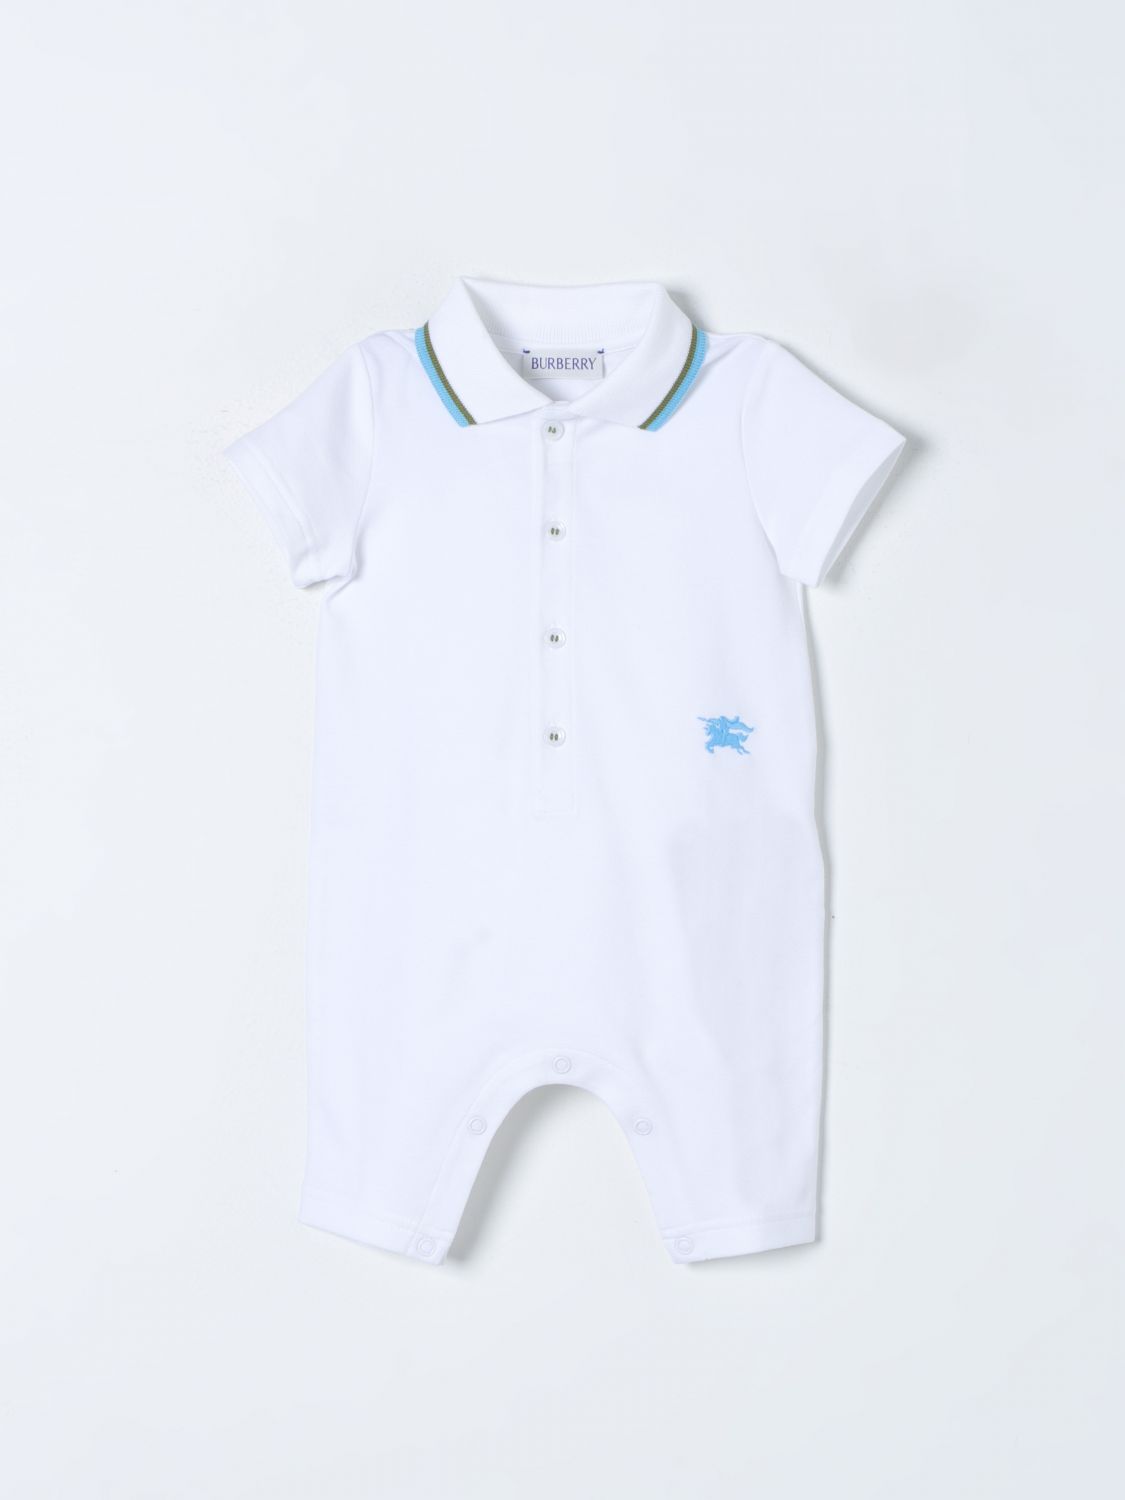 Burberry Tracksuit  Kids Kids Color White